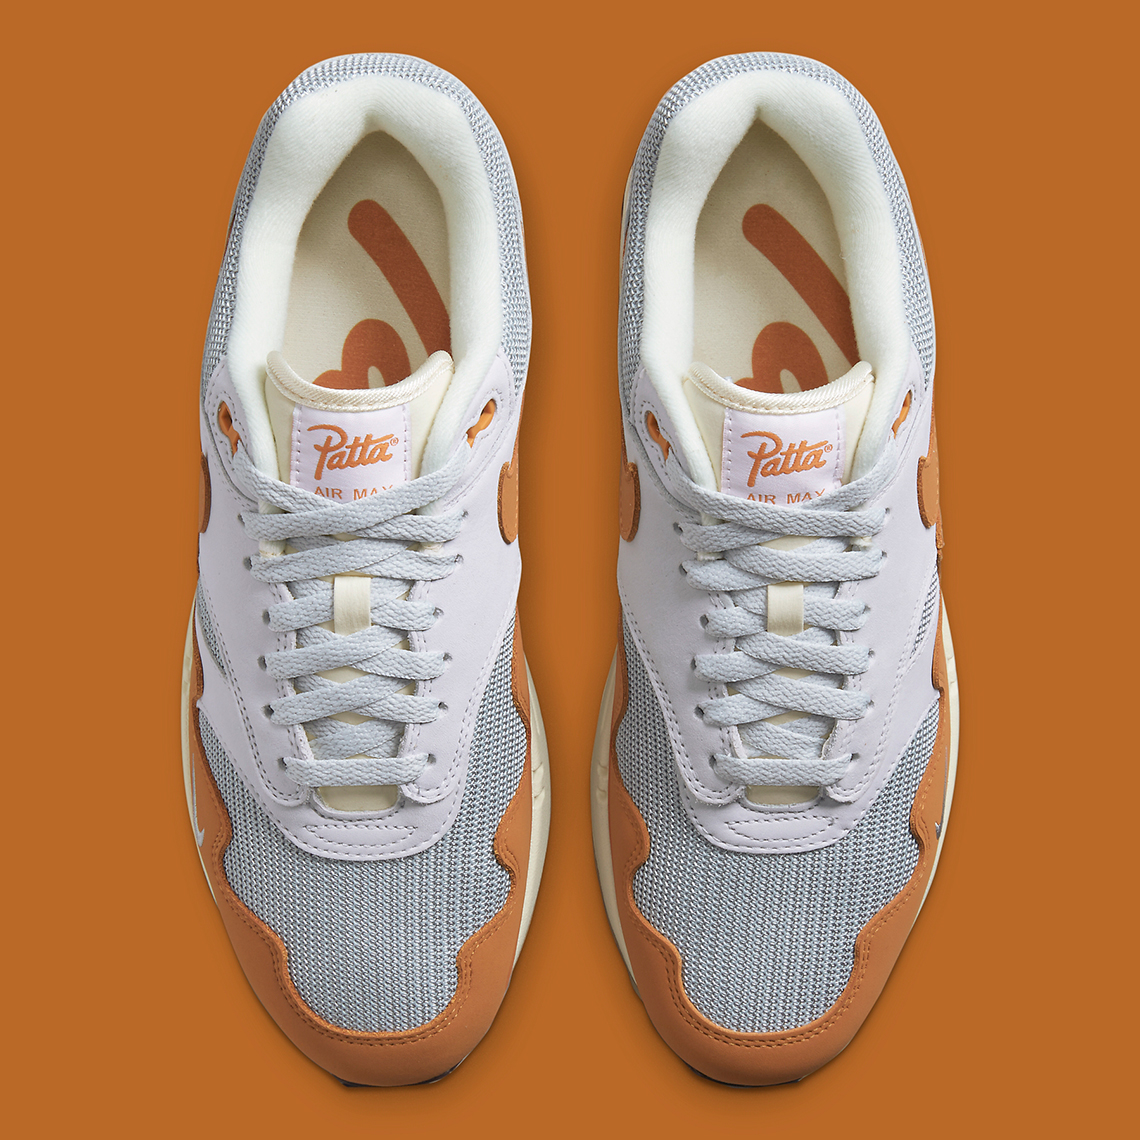 Patta nike spring blade running shoes sale cape town Dh1348 001 6